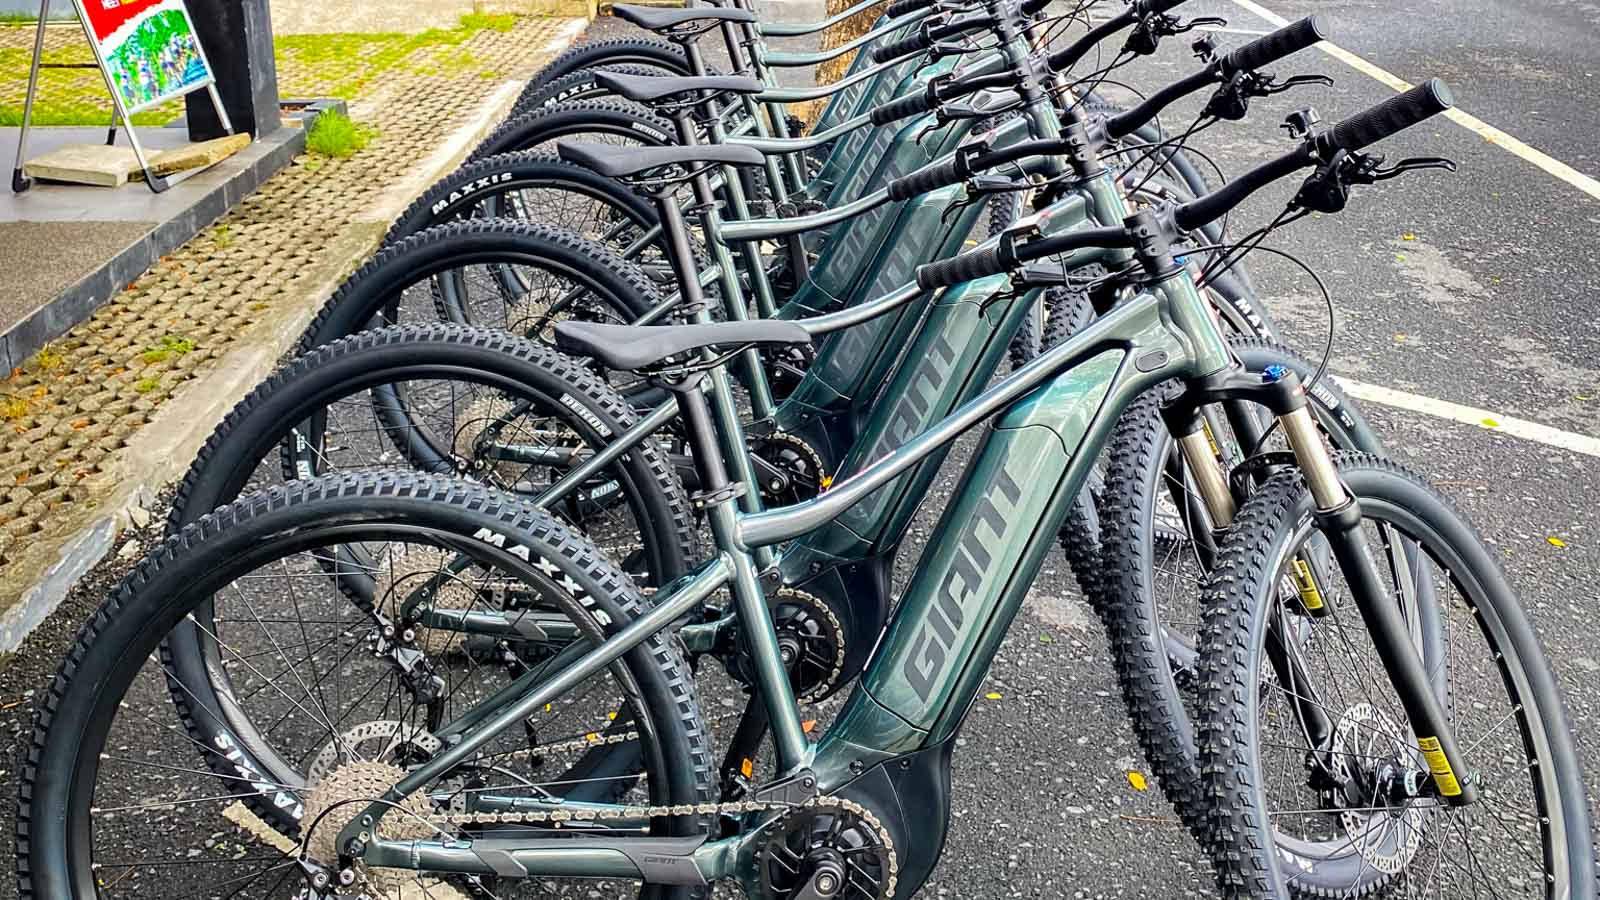 New Giant E-Bikes Just Arrived